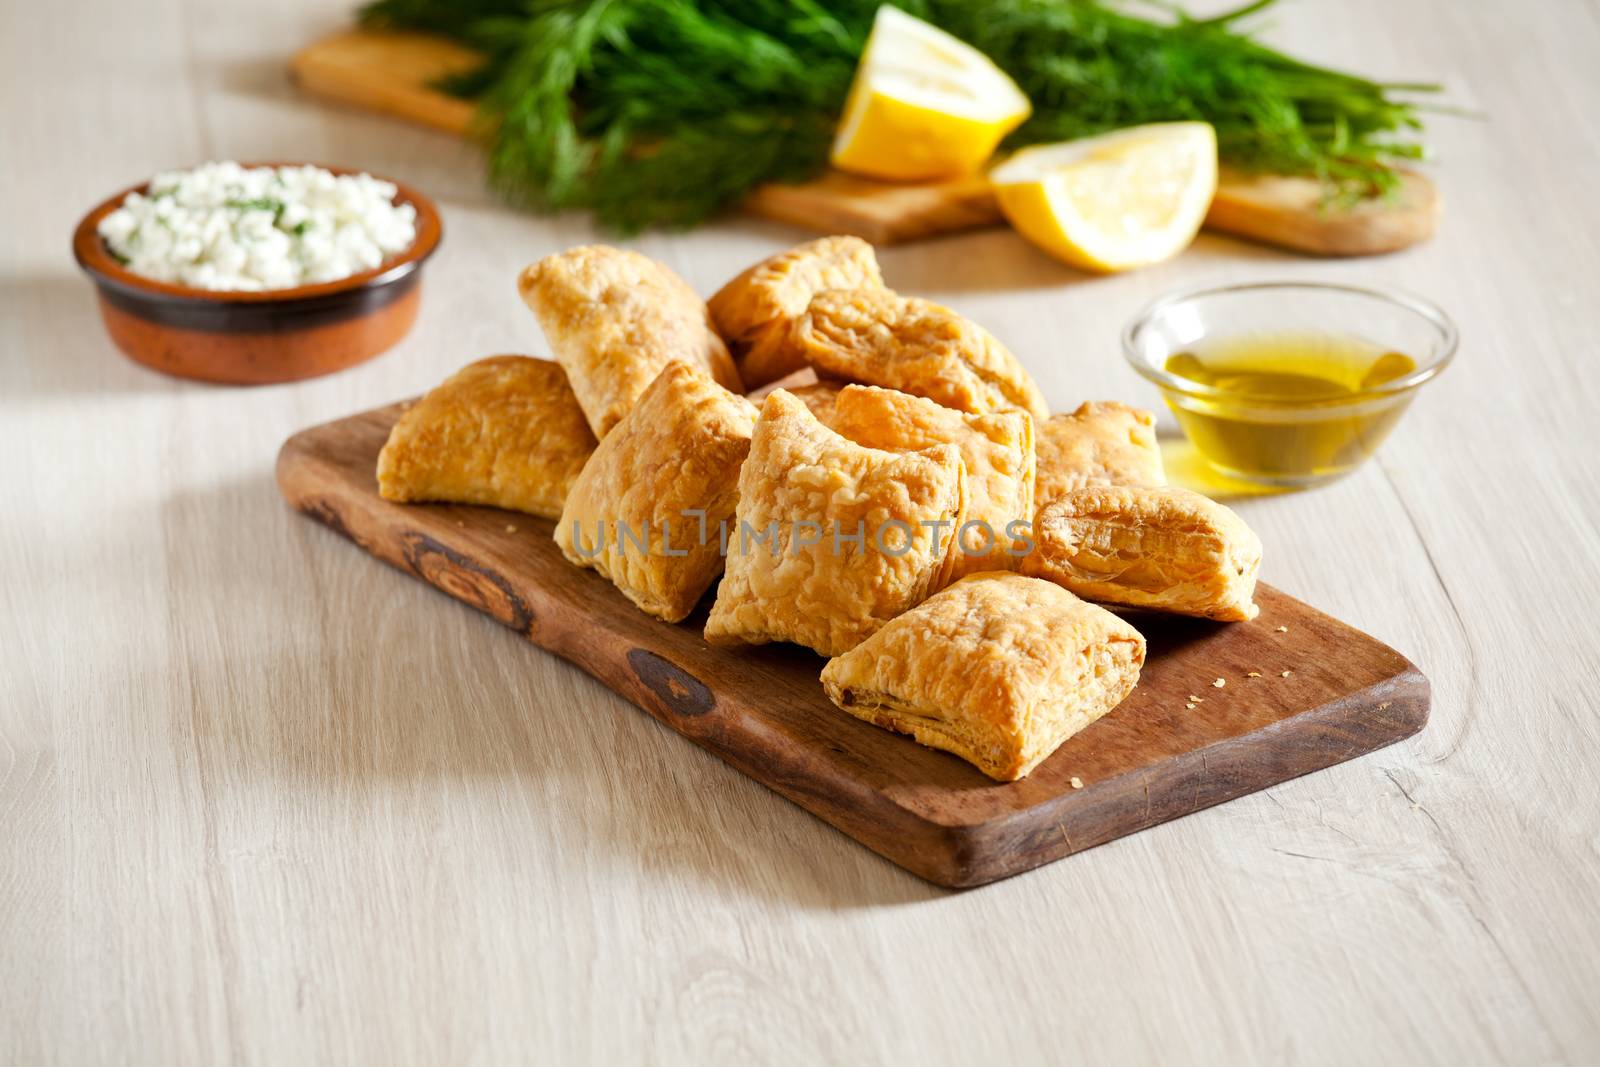 Small Homemade Greek Cheese Pies With Fresh Herbs by mpessaris